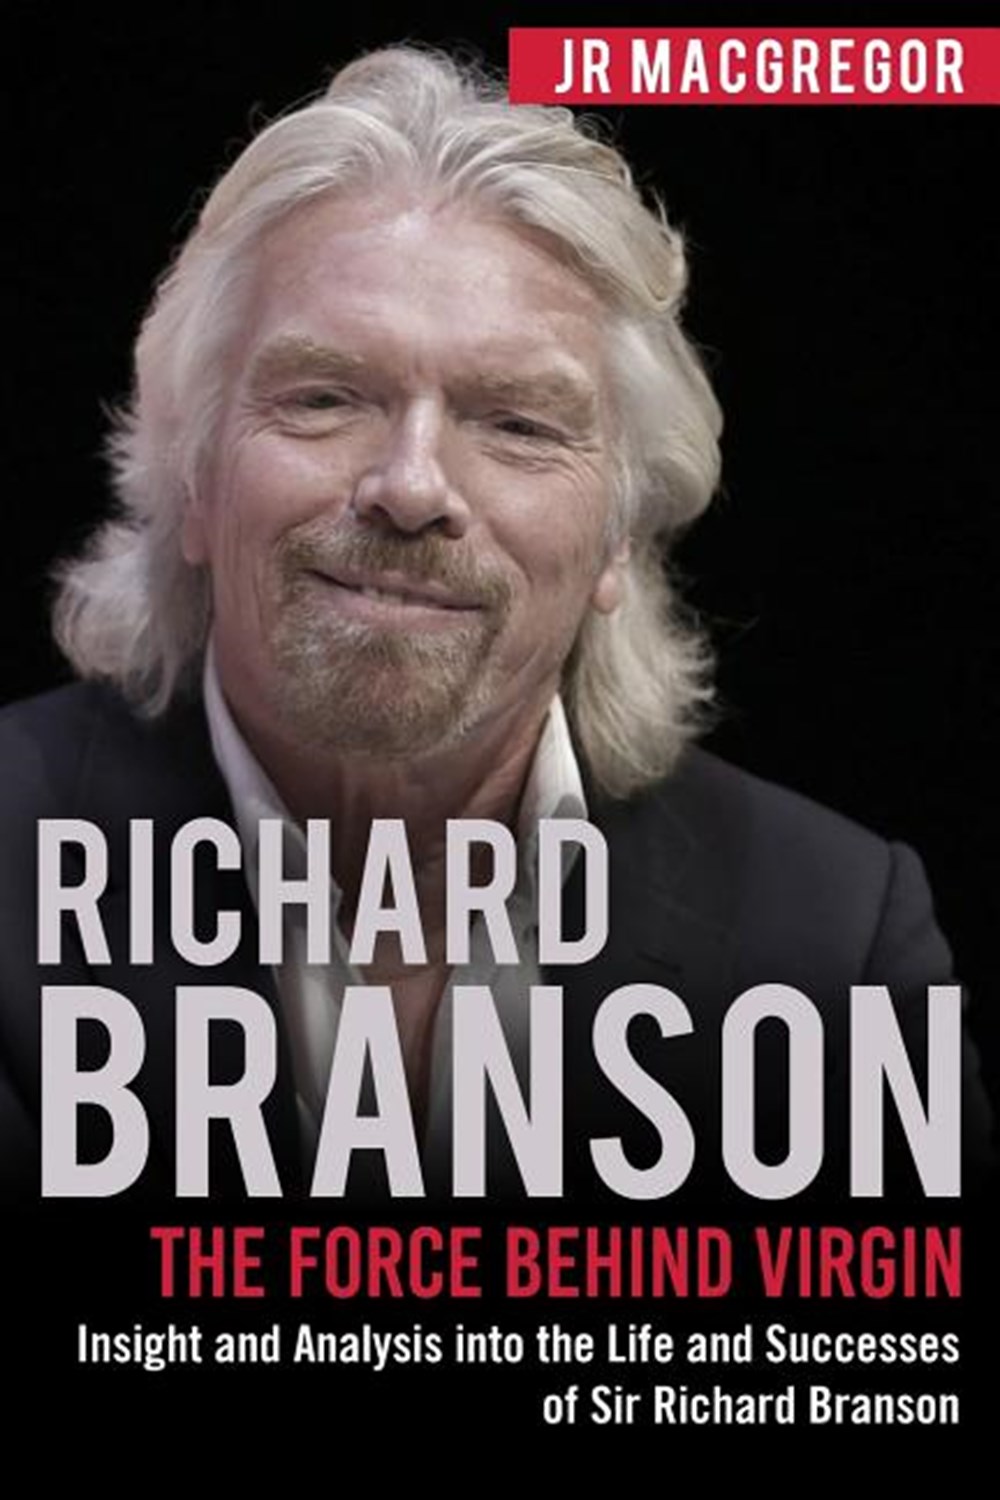 Richard Branson The Force Behind Virgin: Insight and Analysis into the Life and Successes of Sir Ric